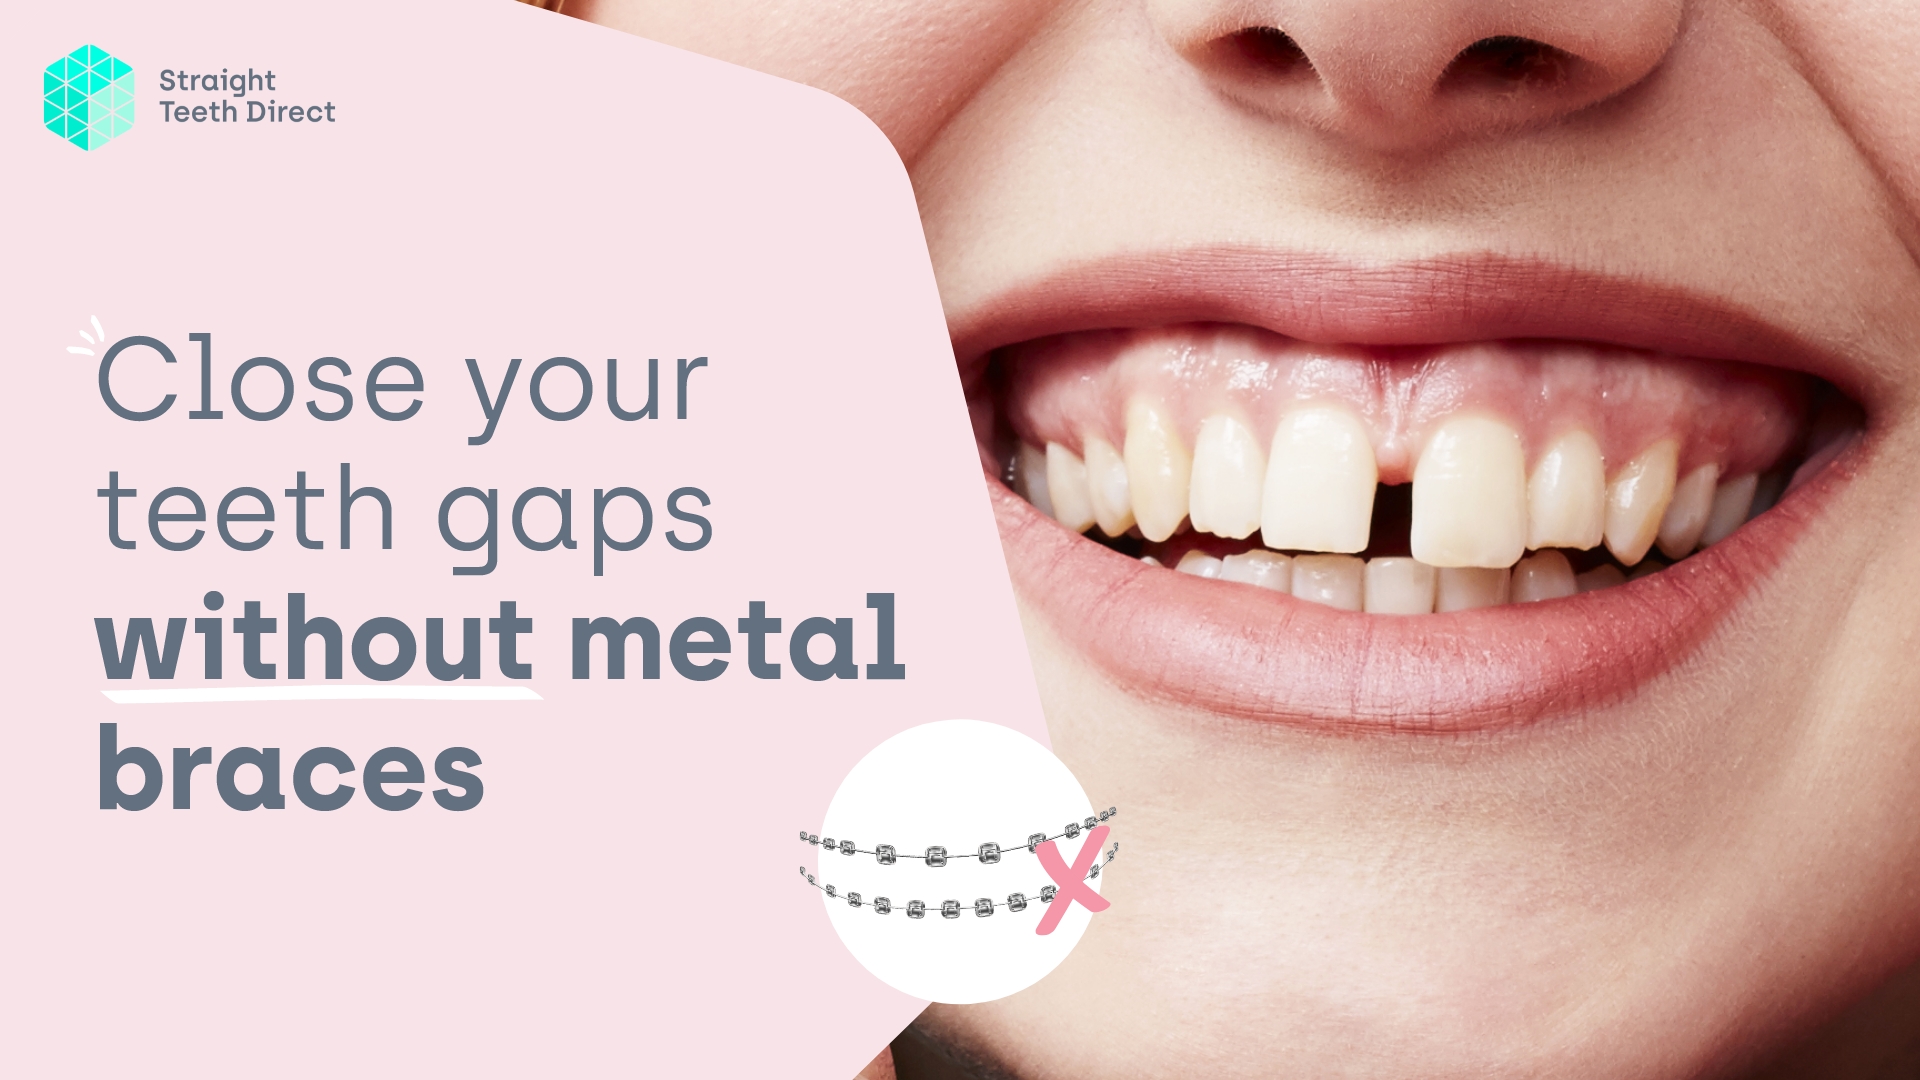 Can teeth gaps be closed with no braces